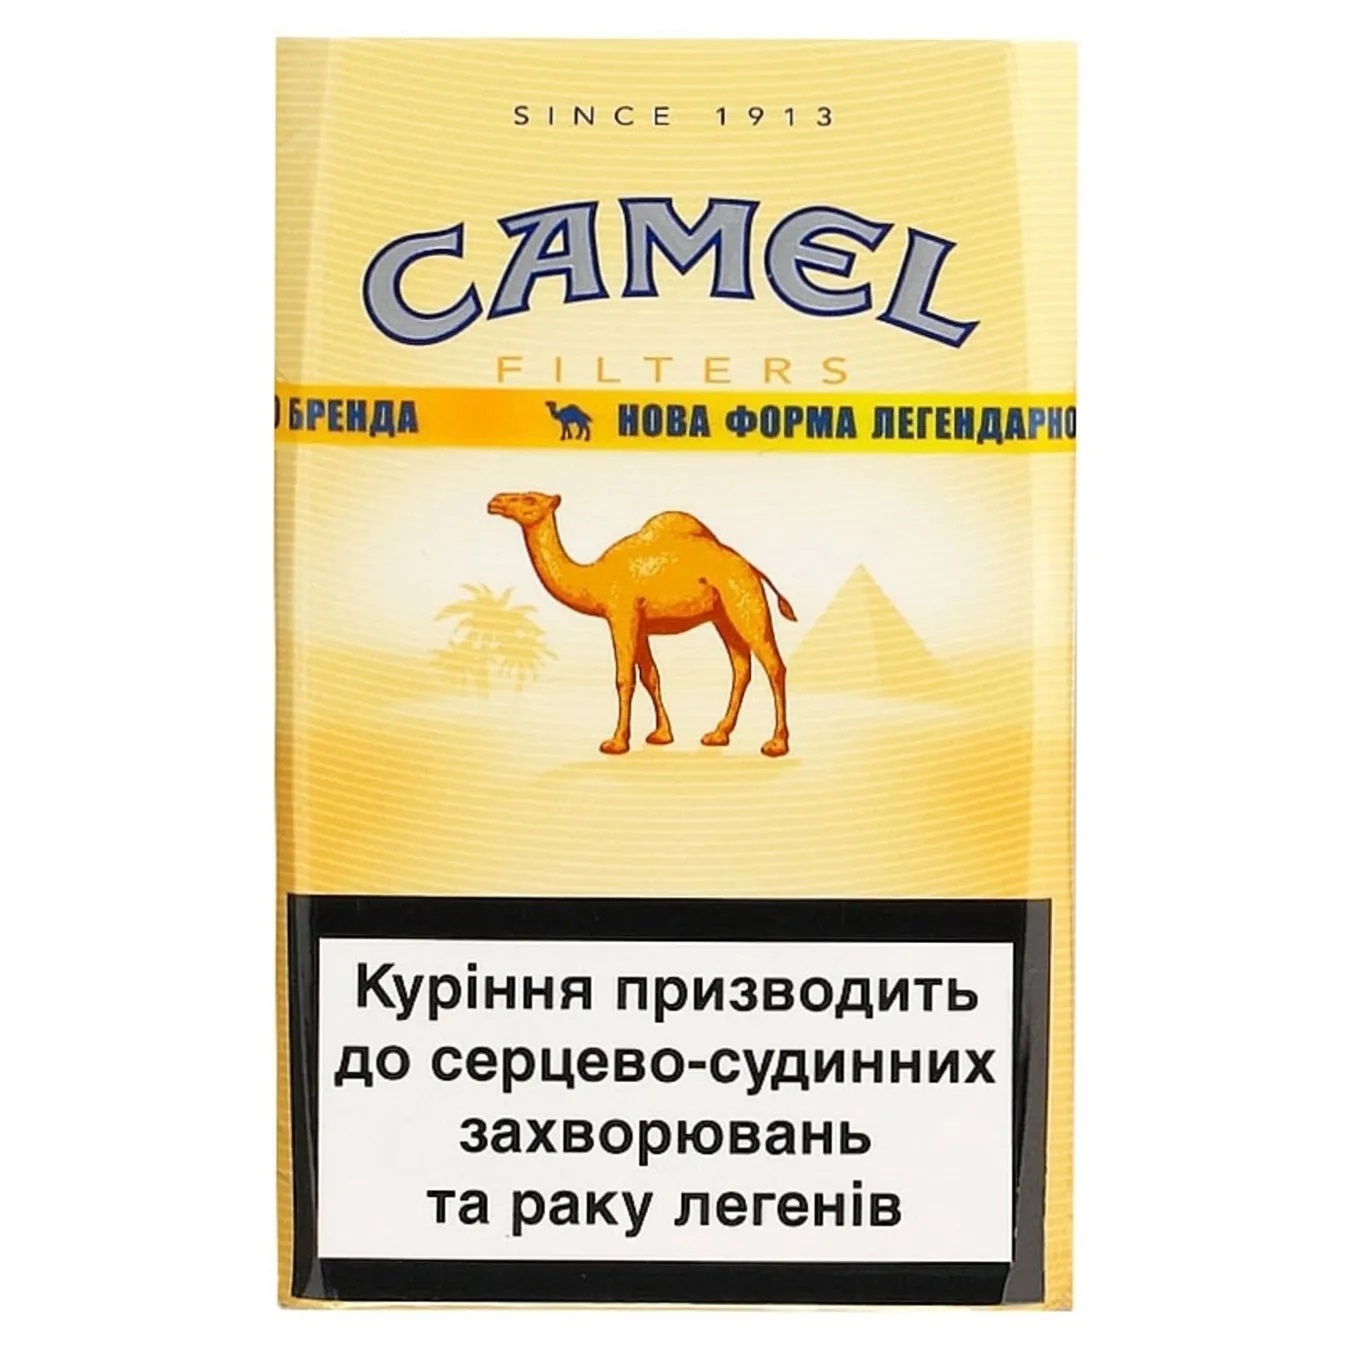 Camel cigarettes 20 pcs (the price is indicated without excise tax)